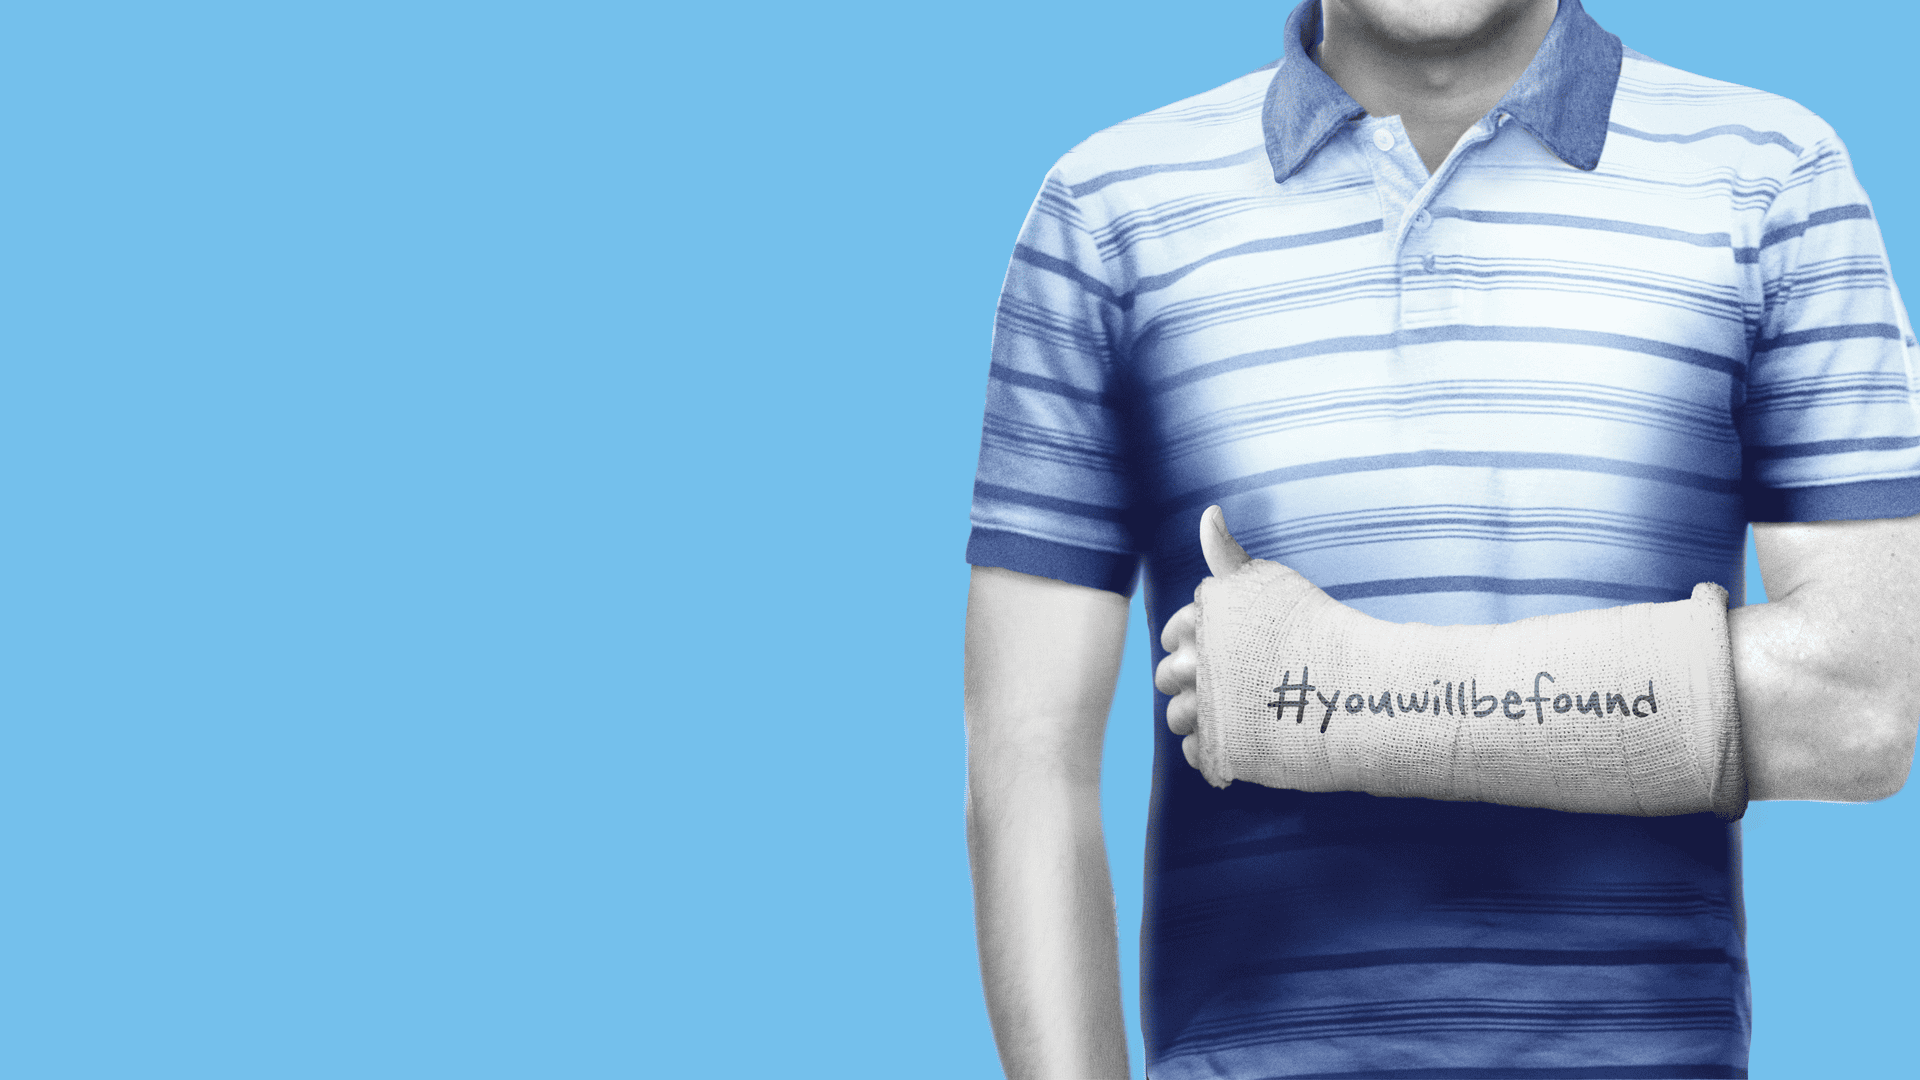 Dear Evan Hansen Key Art of a boy with a cast on his forearm. #YouWillBeFound is handwritten in black on the cast.